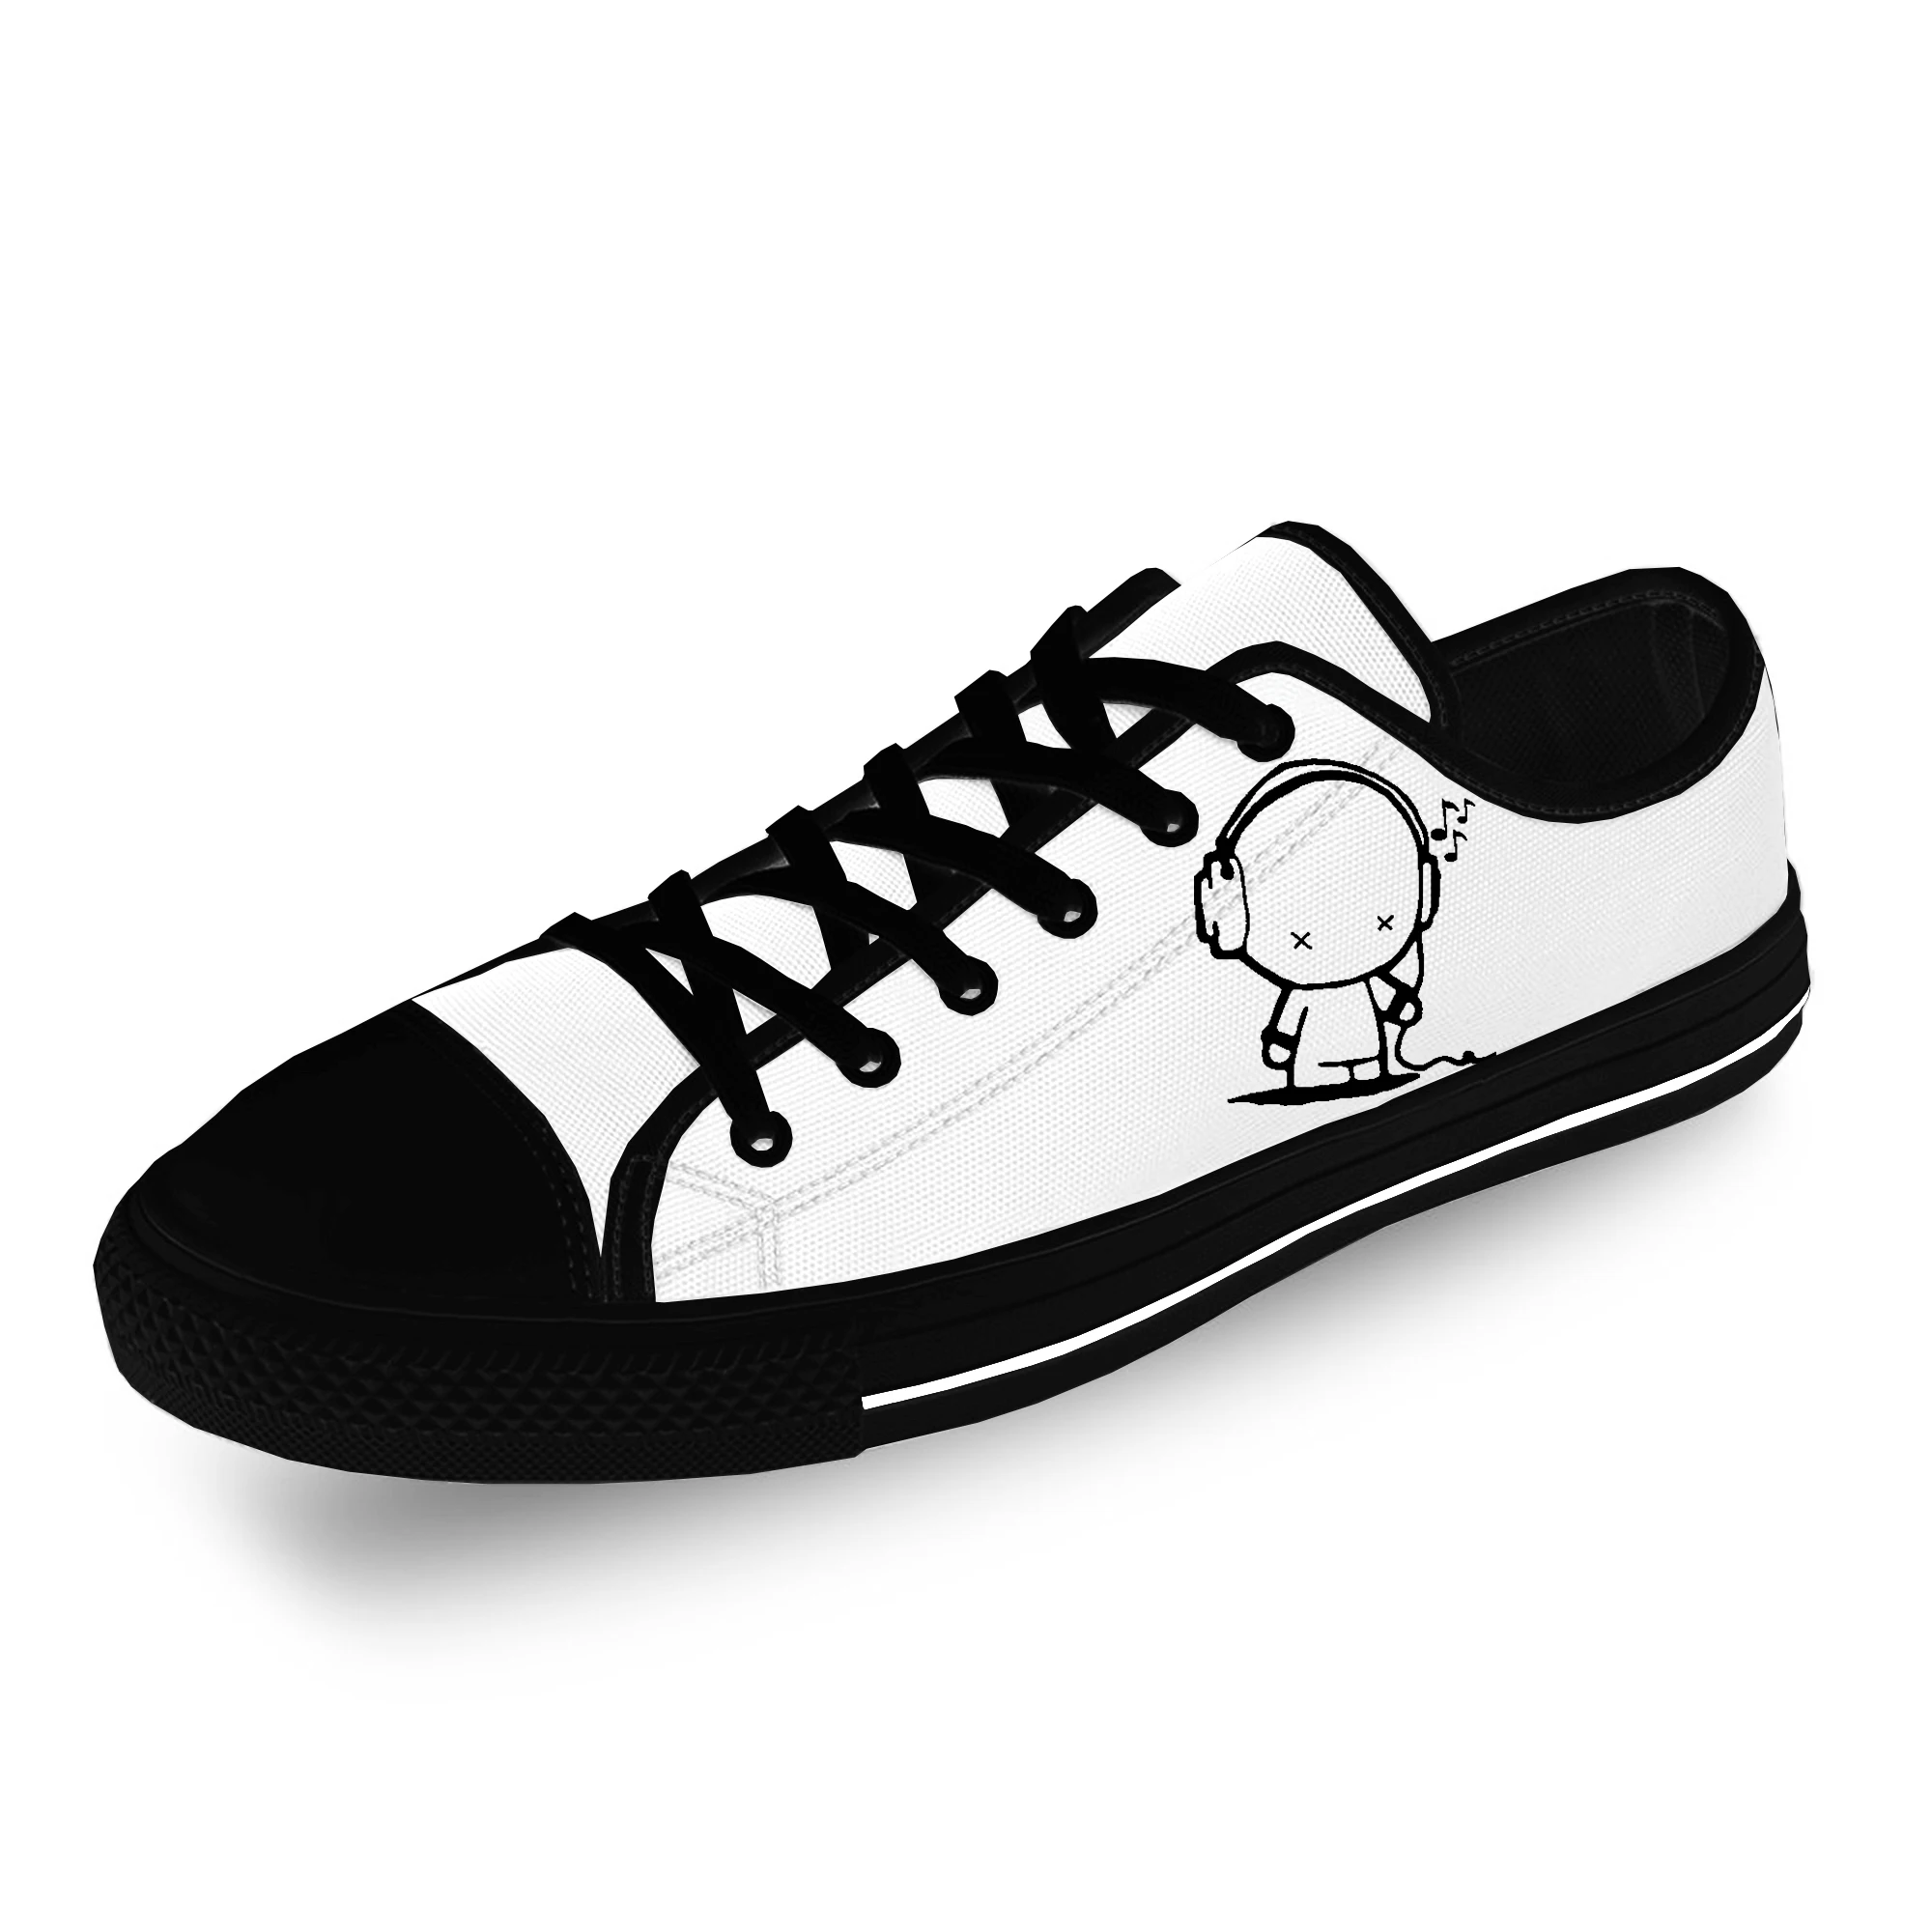 Headset Cartoon Music Rock Cool Casual Cloth Fashion 3D Print Low Top Canvas Shoes Men Women Lightweight Breathable Sneakers cartoon bear animal funny cute casual cloth fashion 3d print low top canvas shoes men women lightweight breathable sneakers